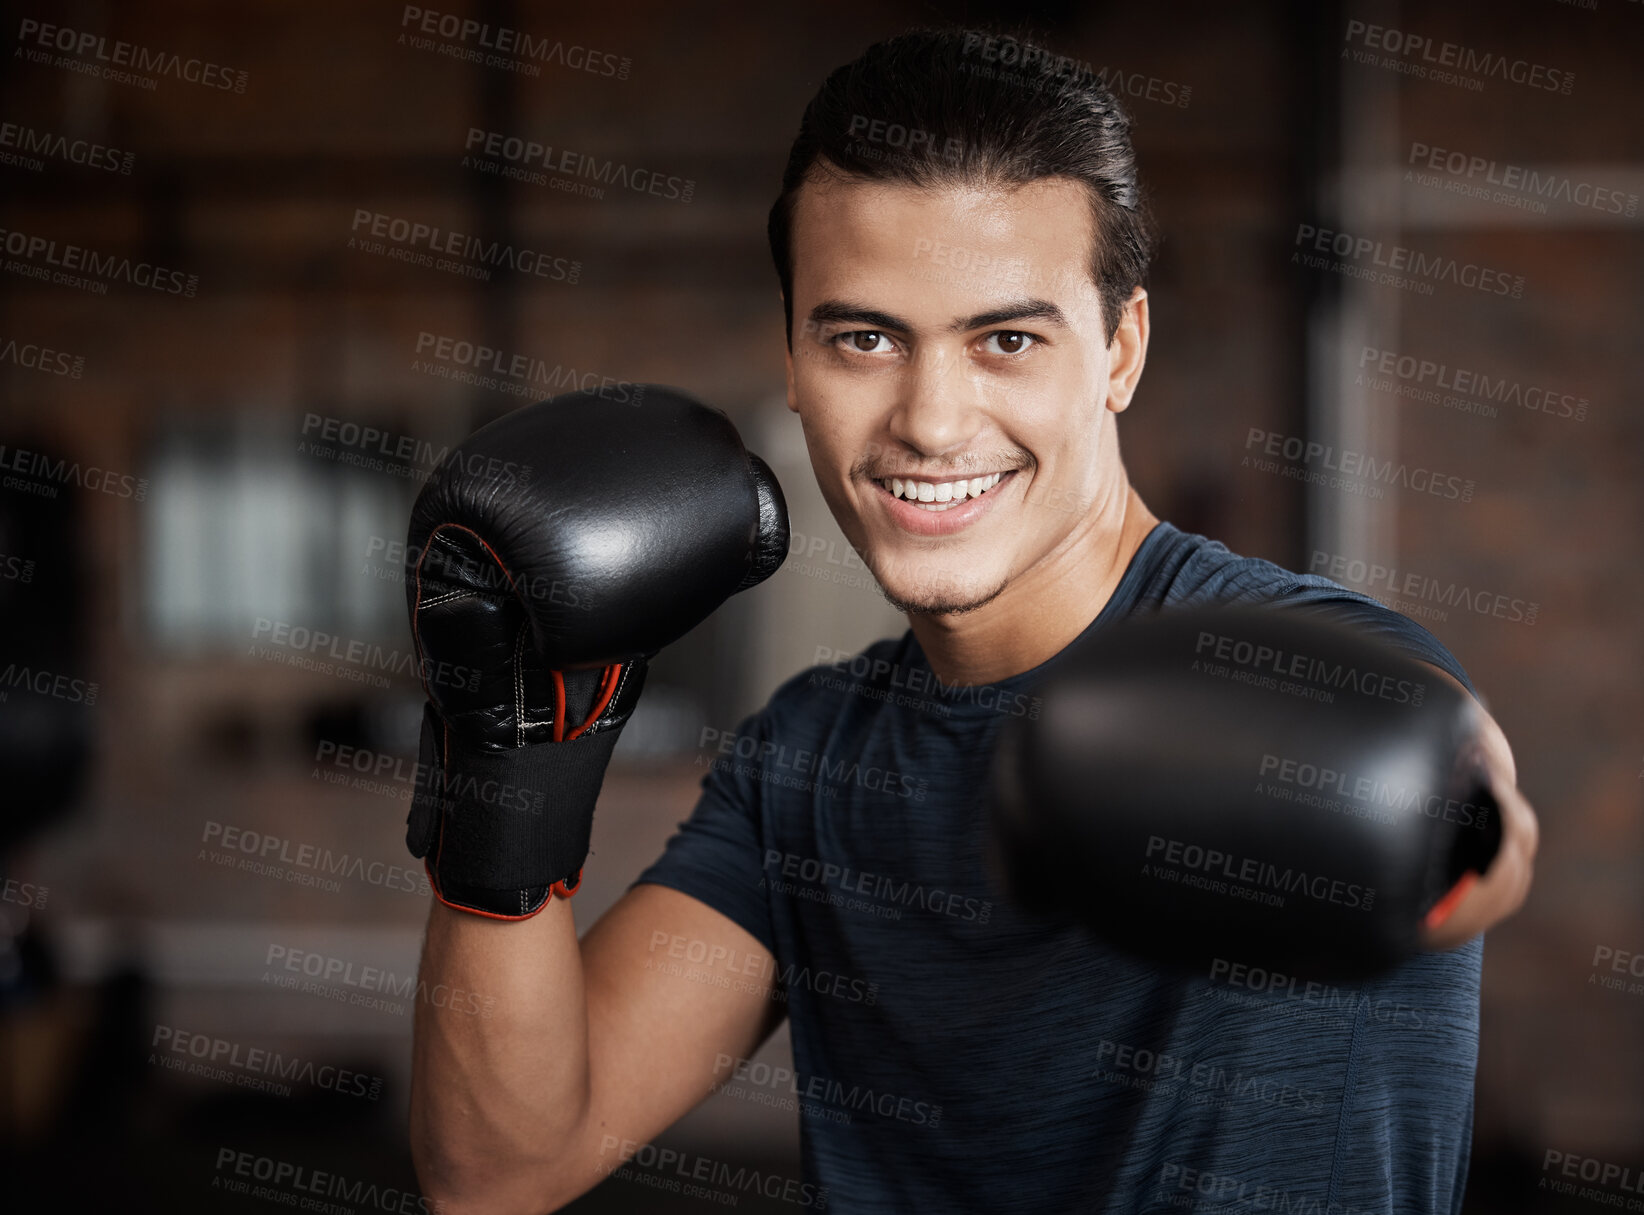 Buy stock photo Portrait, fitness and workout with a boxer man training for a fight or competition in a gym for sports. Health, exercise and power with a young male athlete boxing in an mma or self defense club